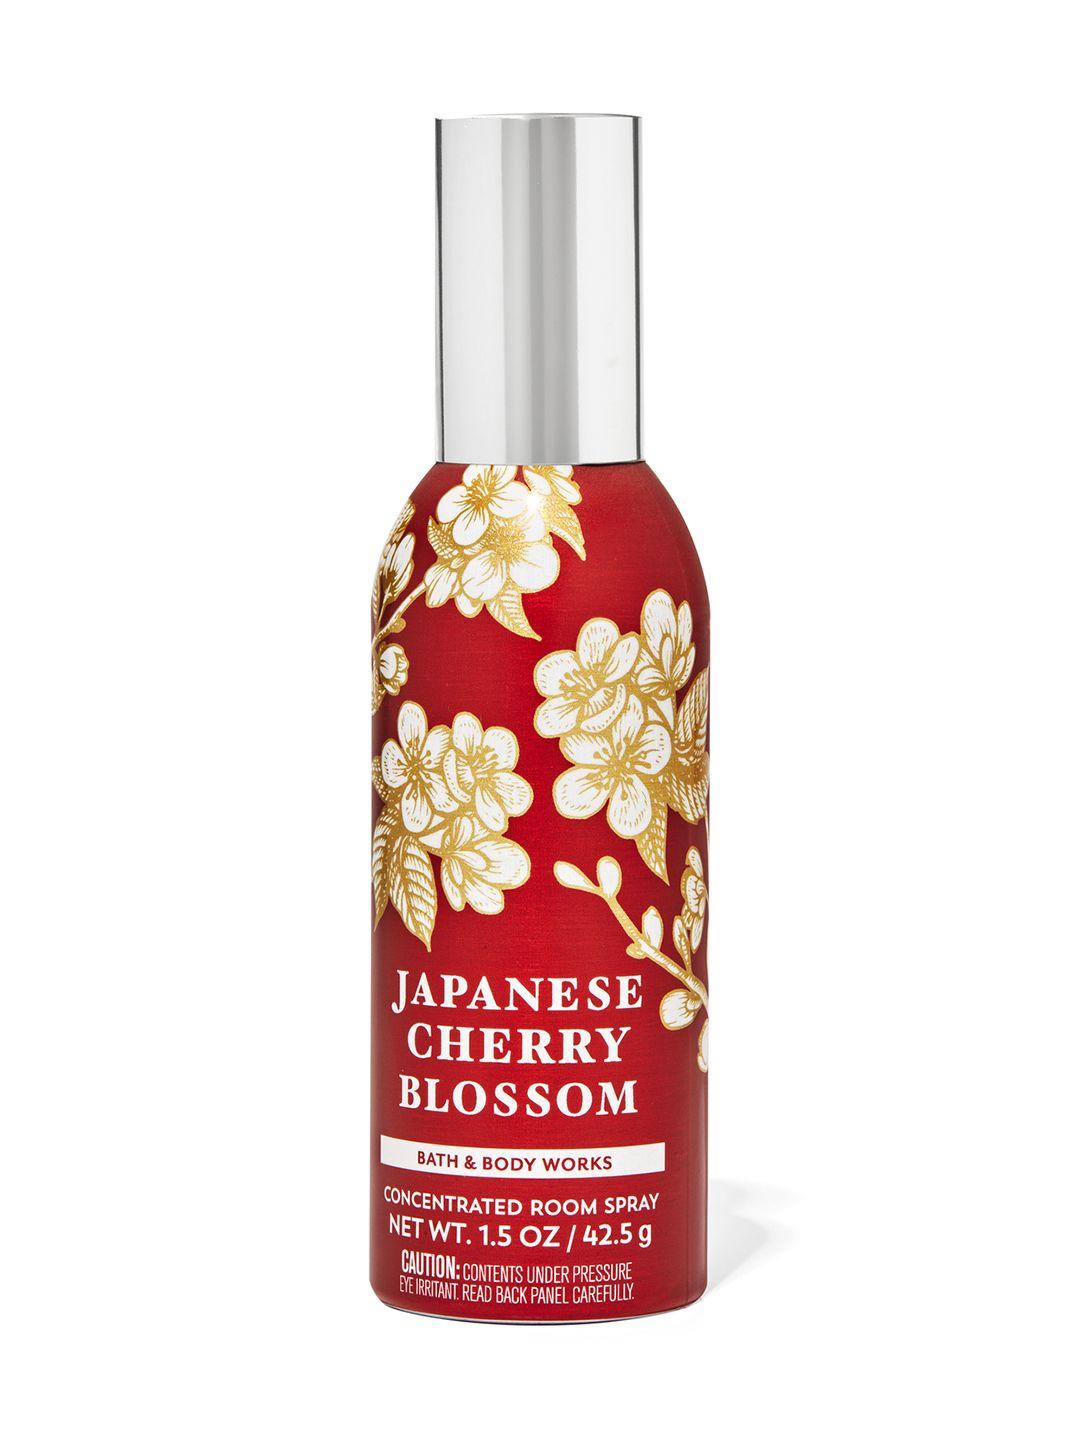 bath & body works japanese cherry blossom concentrated room spray - 42.5 g